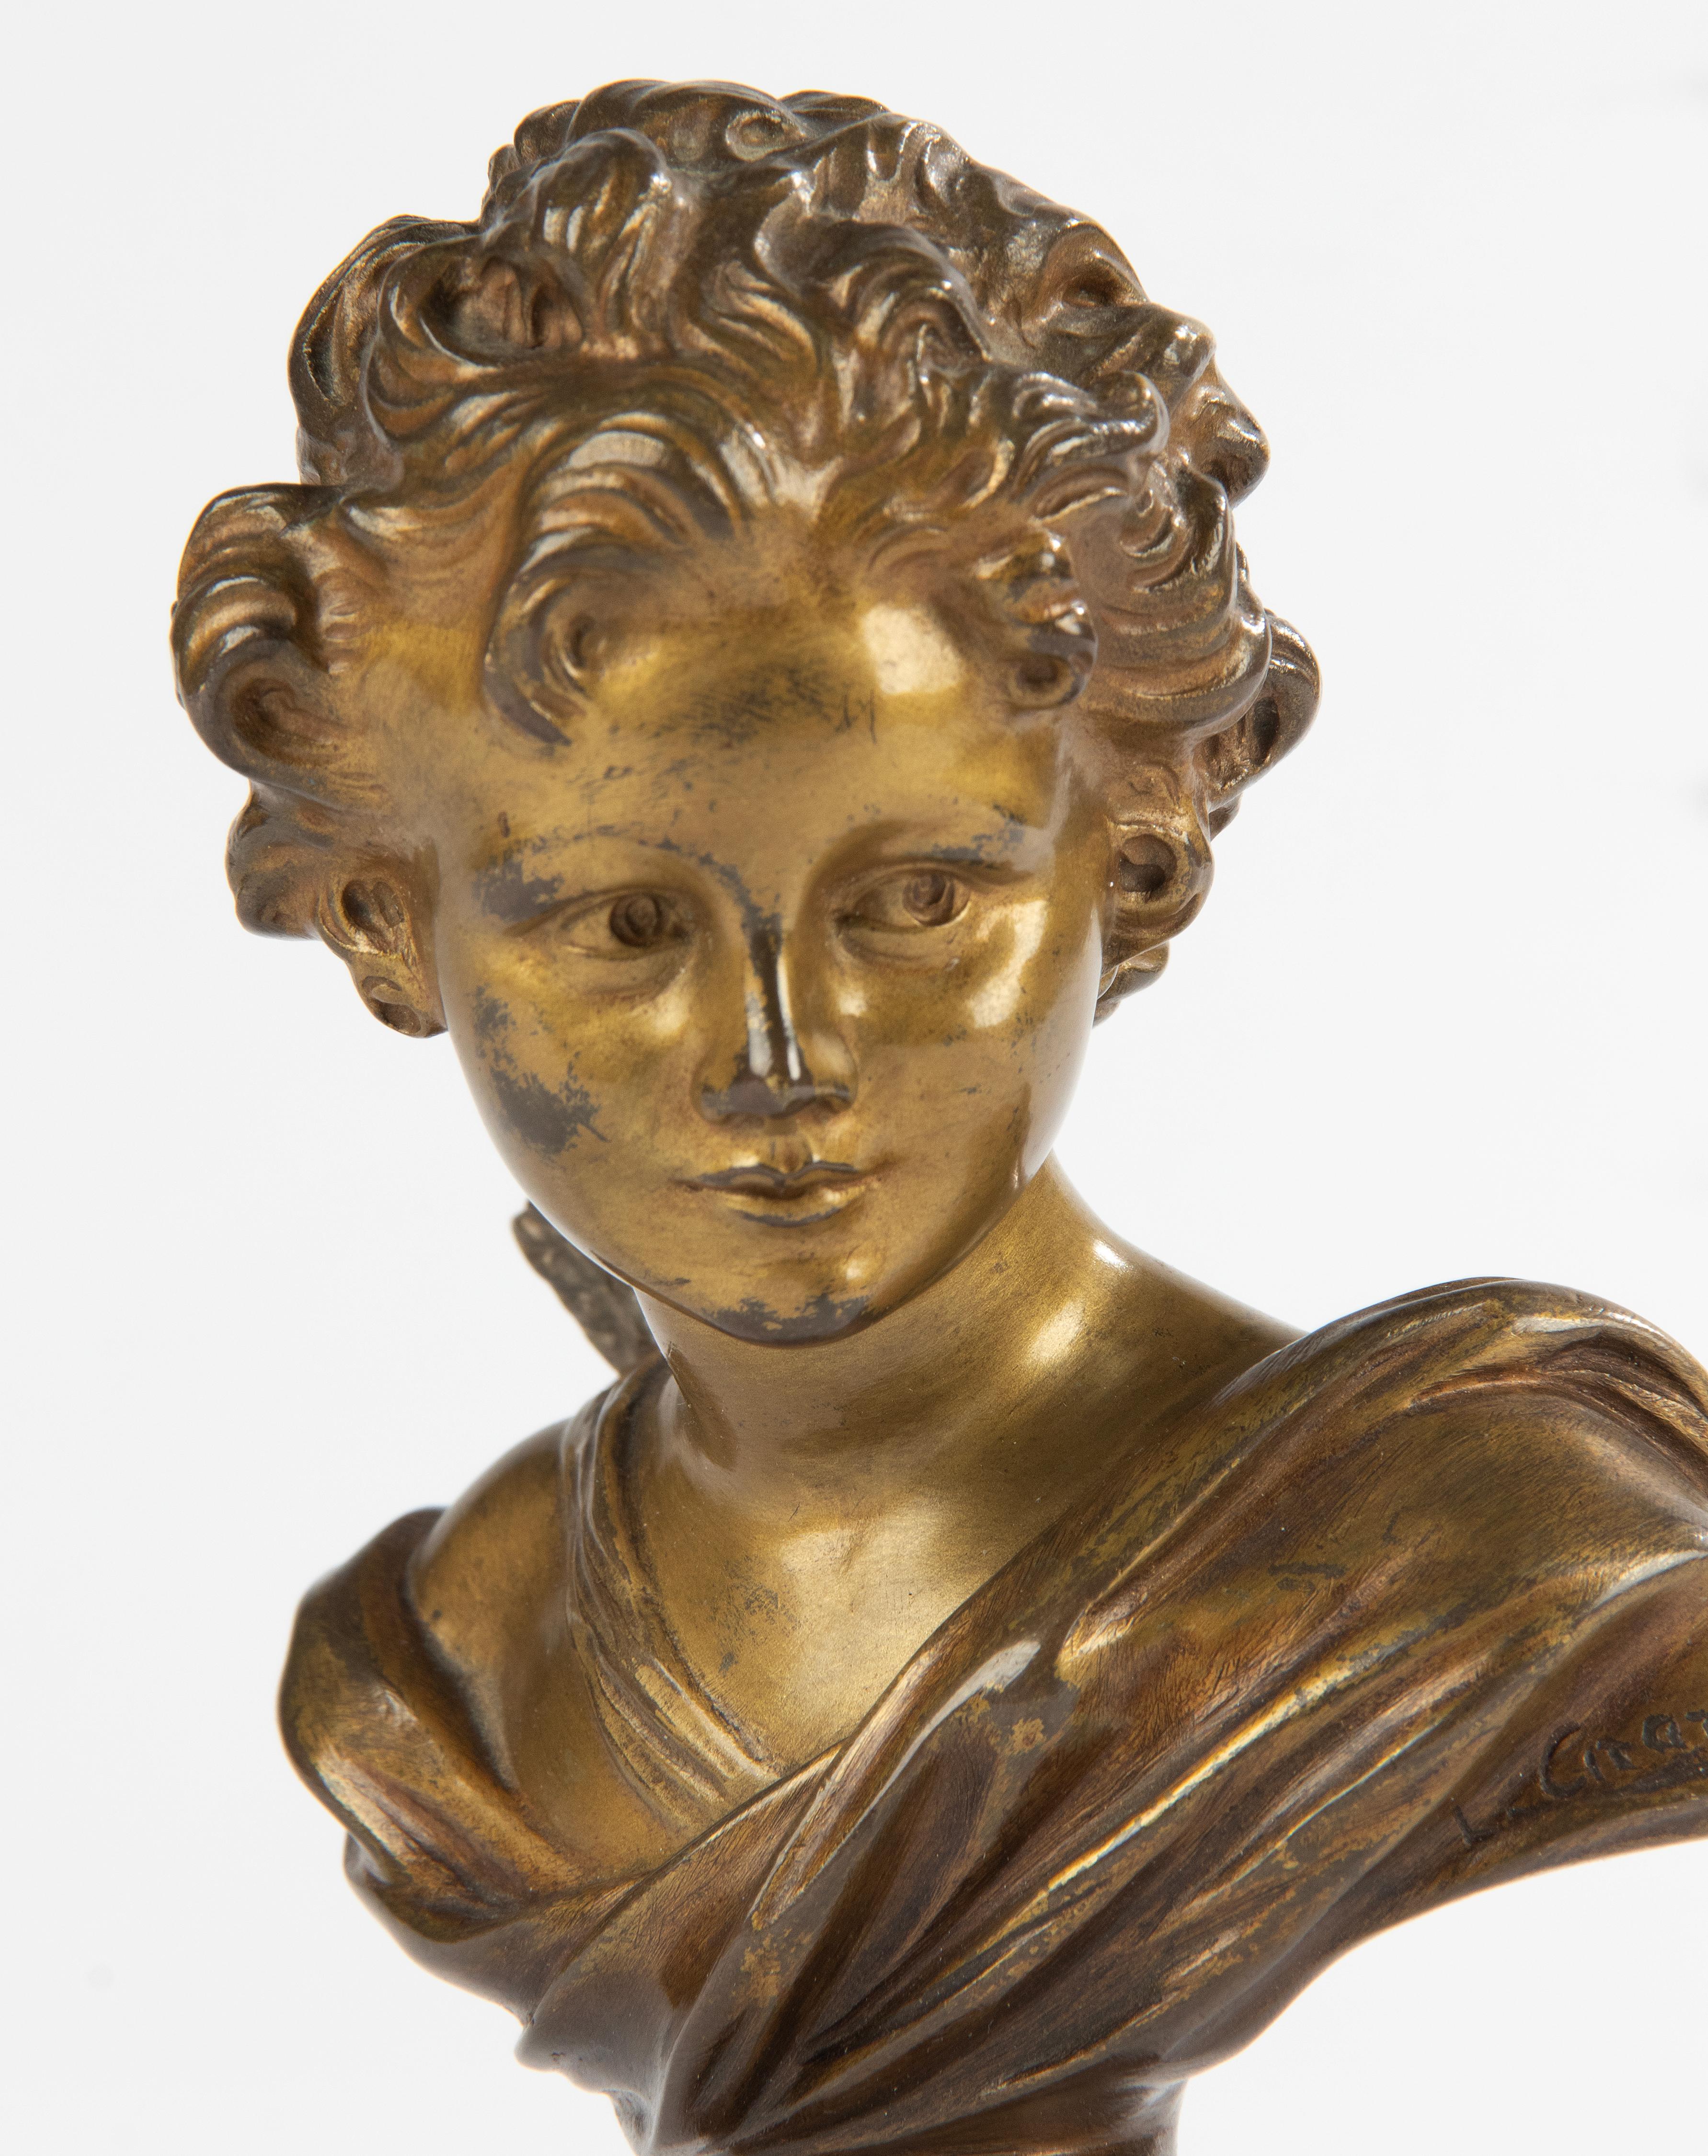 A finely bust of Cupido/Amor, made of patinated bronze. Fine quality casting and chiseling. Signed on the right shoulder Agathon Léonard. On the back the bronze foundry mark F. Goldscheider. Numbered as well, 33 / 1500.
Some wear on the patina, see